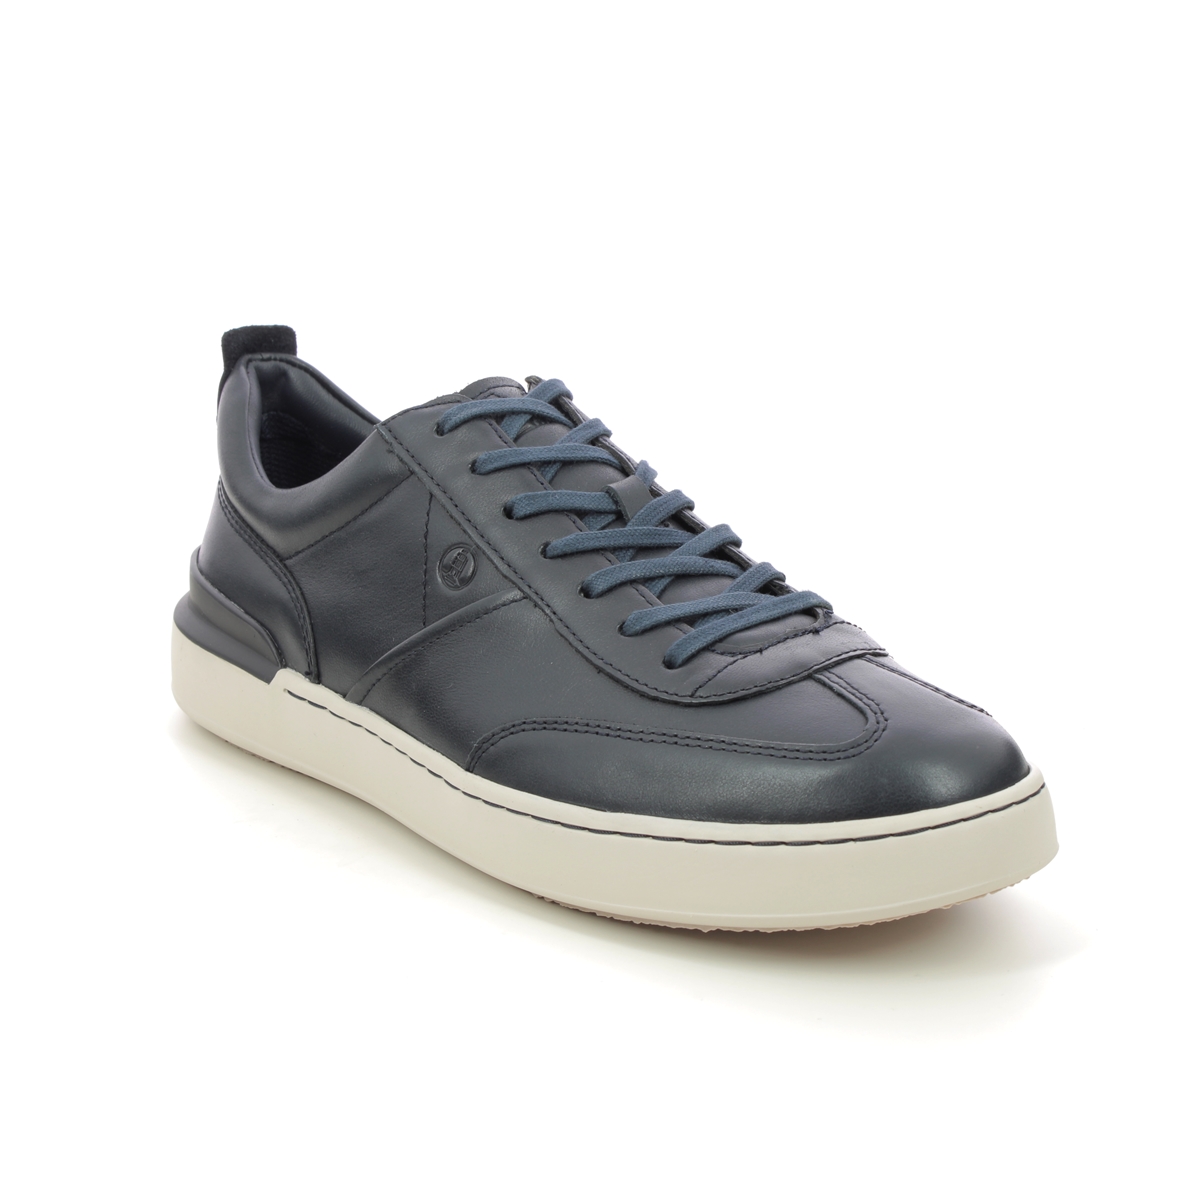 Clarks Courtlite Mode Navy Leather Mens Trainers 734747G In Size 11 In Plain Navy Leather G Width Fitting